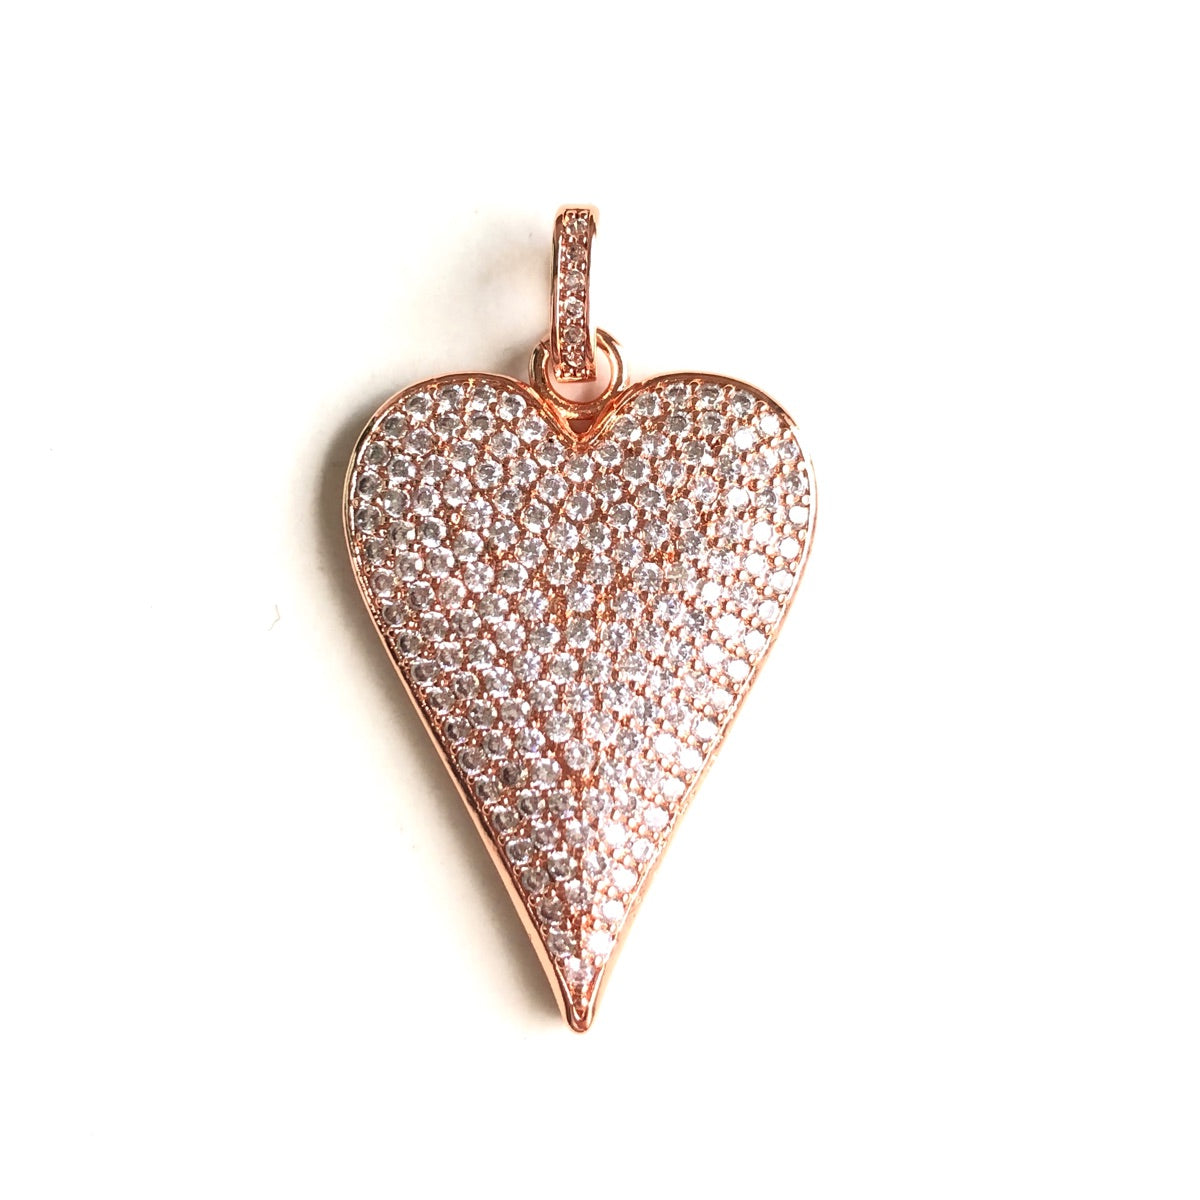 10pcs/lot 40*23mm CZ Paved Heart Charm Pendants Rose Gold CZ Paved Charms Hearts New Charms Arrivals Charms Beads Beyond